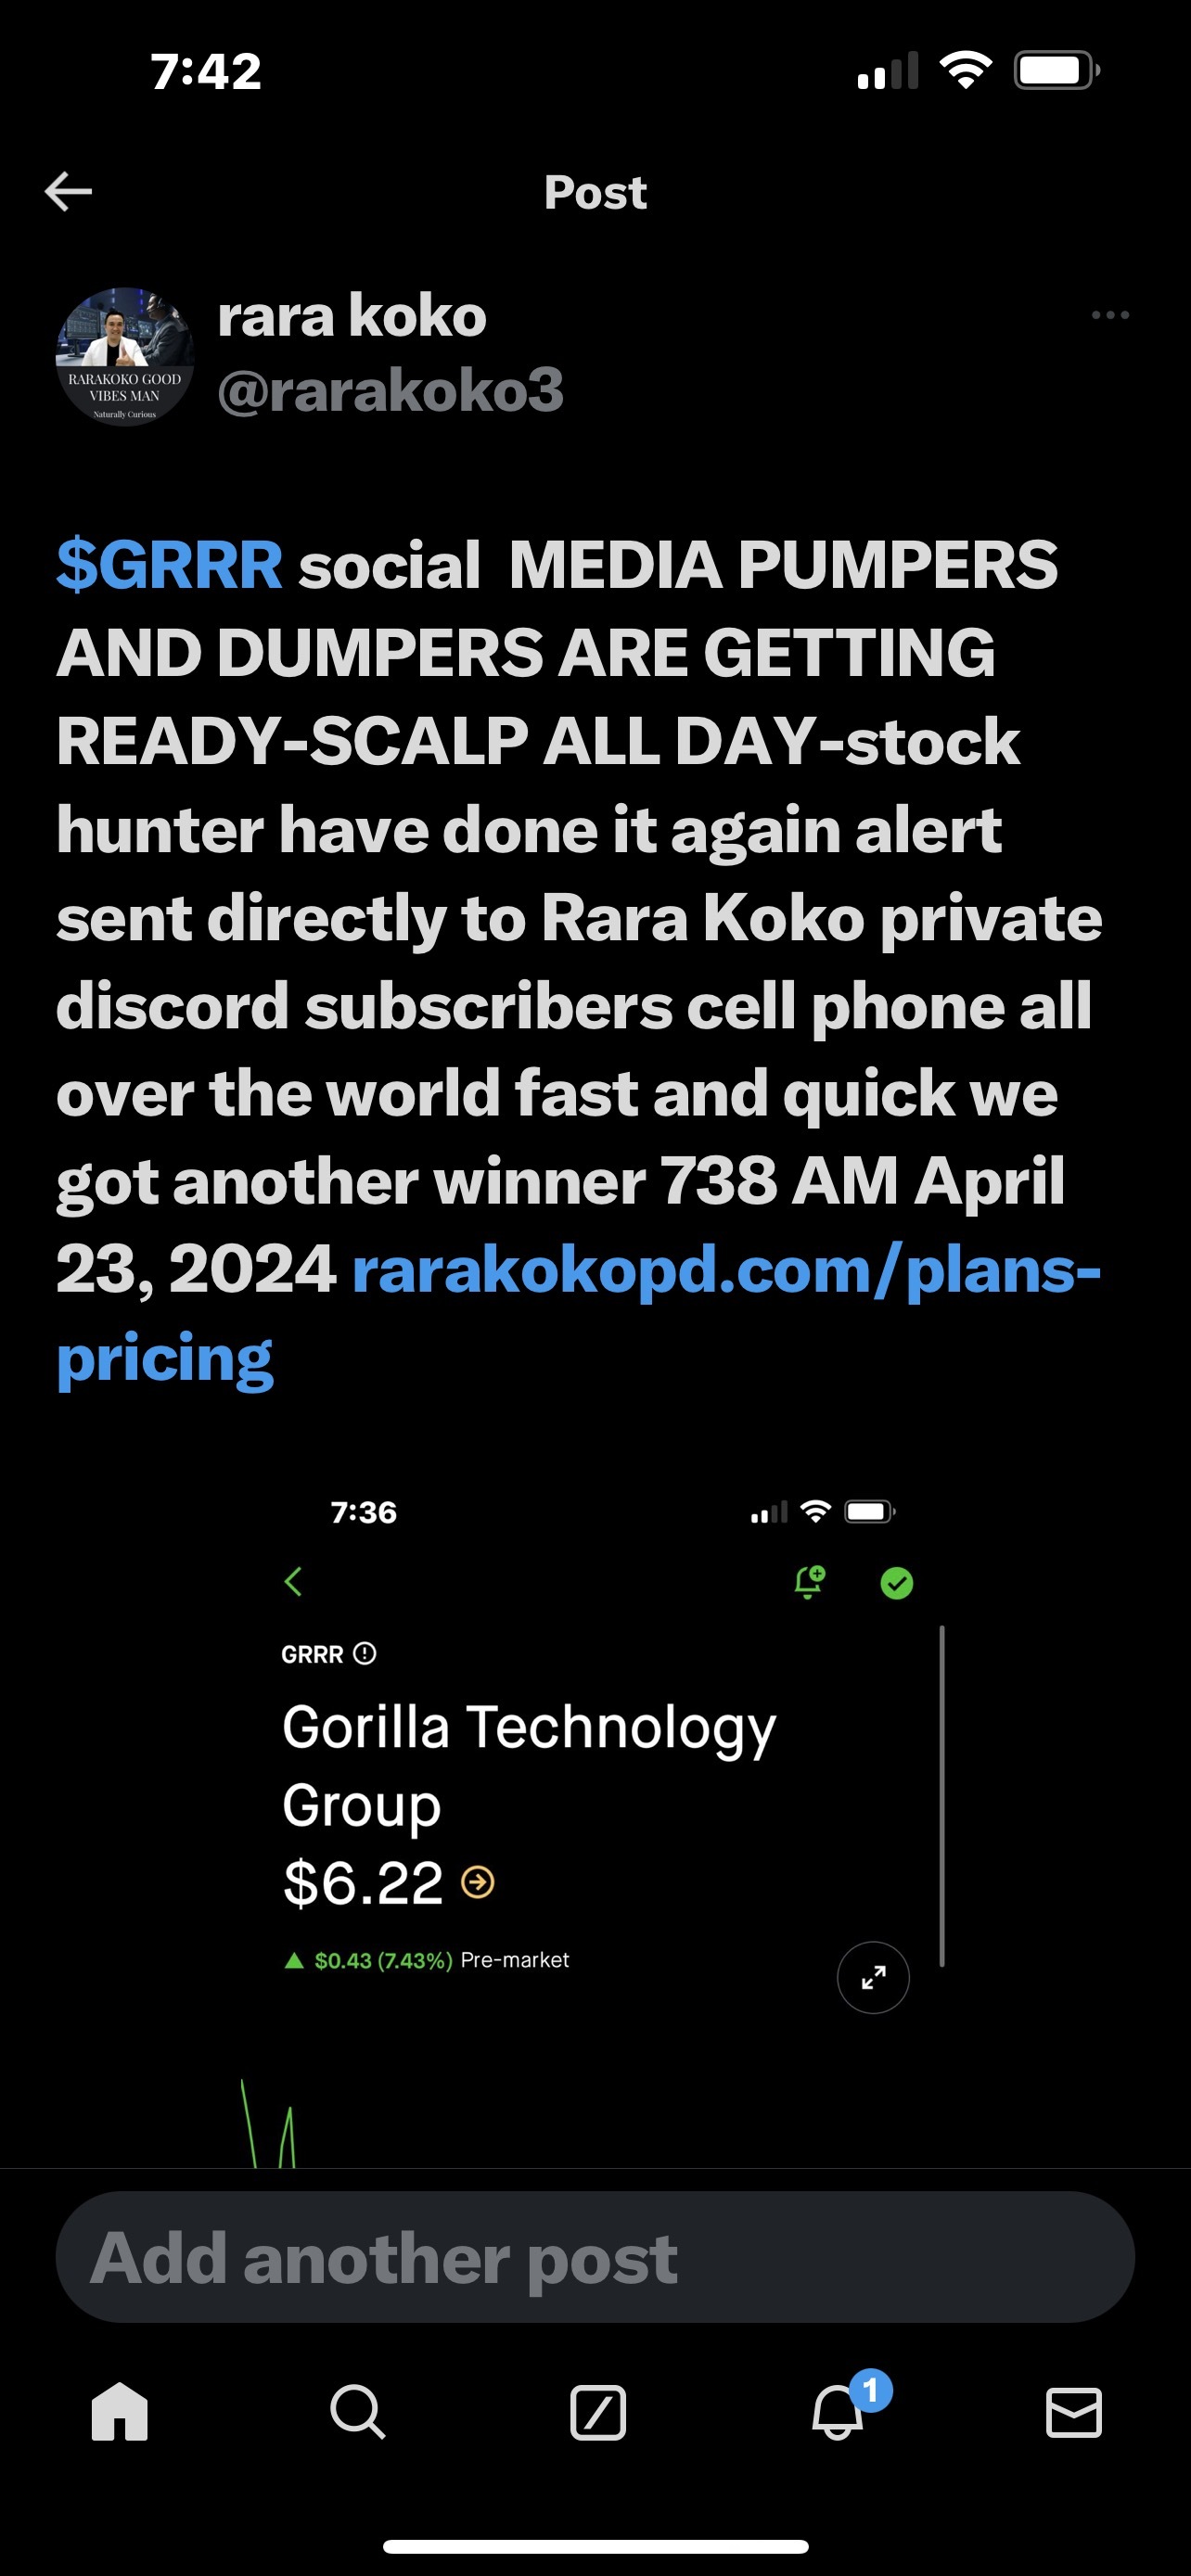 $GRRR social  MEDIA PUMPERS AND DUMPERS ARE GETTING READY-SCALP ALL DAY-stock hunter have done it again alert sent directly to Rara Koko private discord subscri...